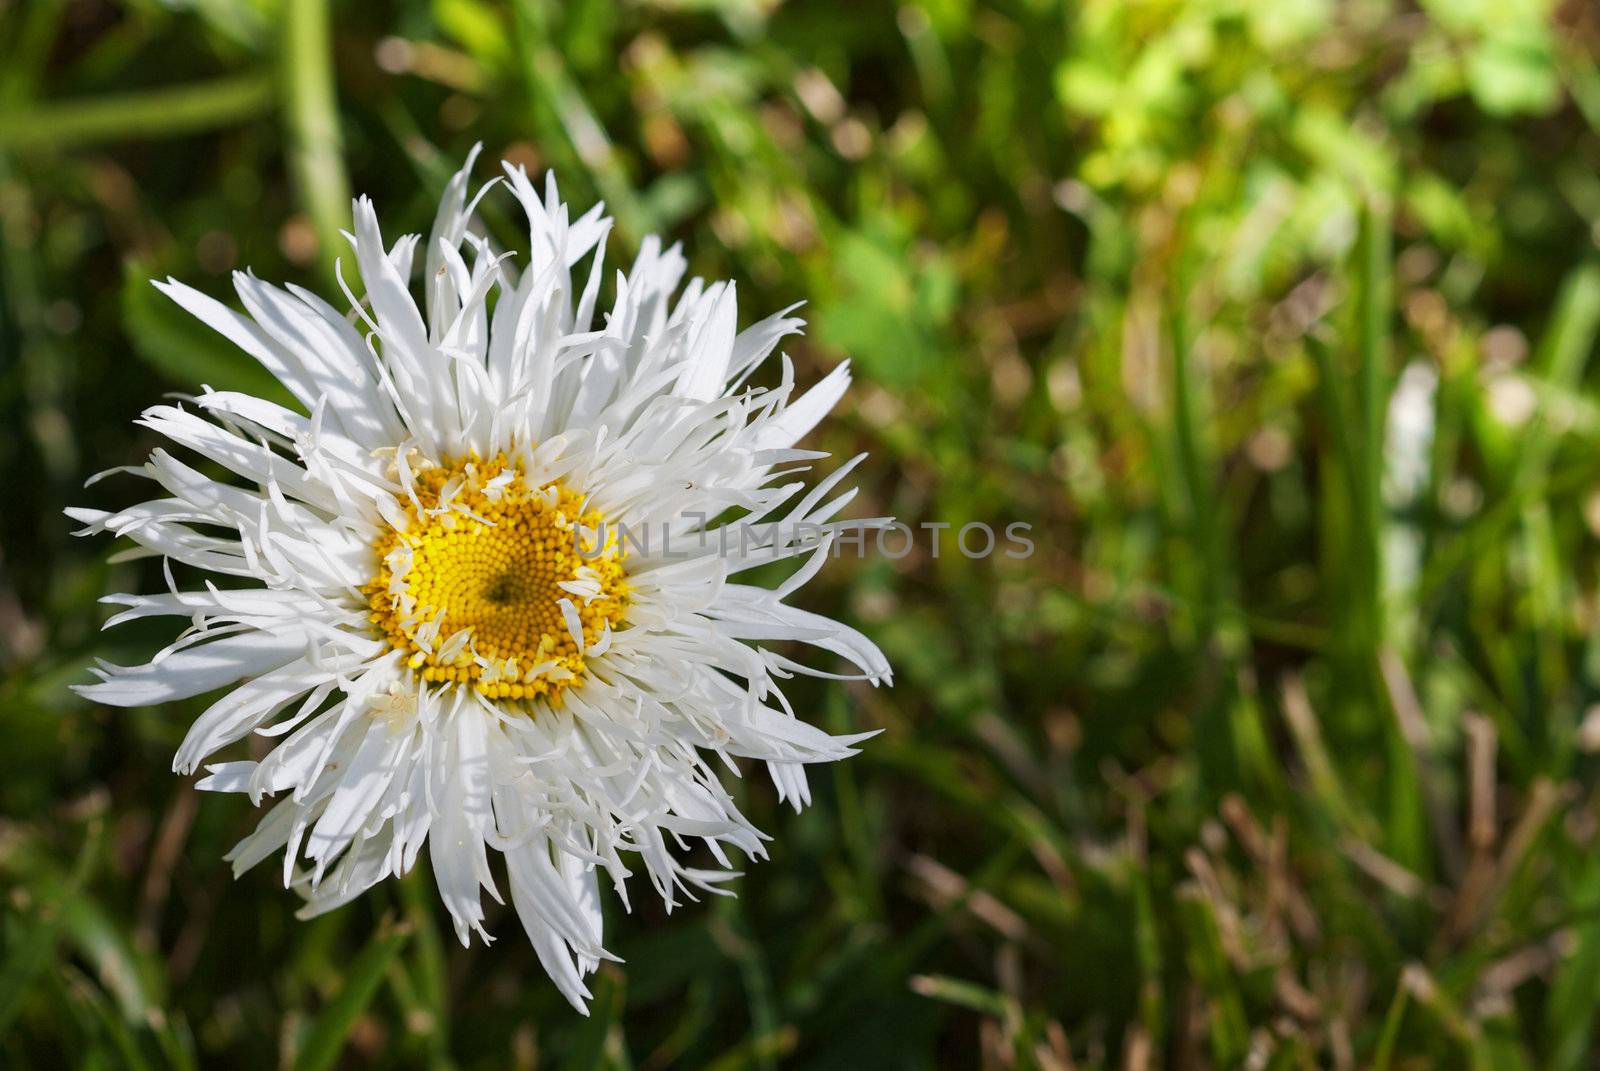 Daisy in the Grass by bobkeenan